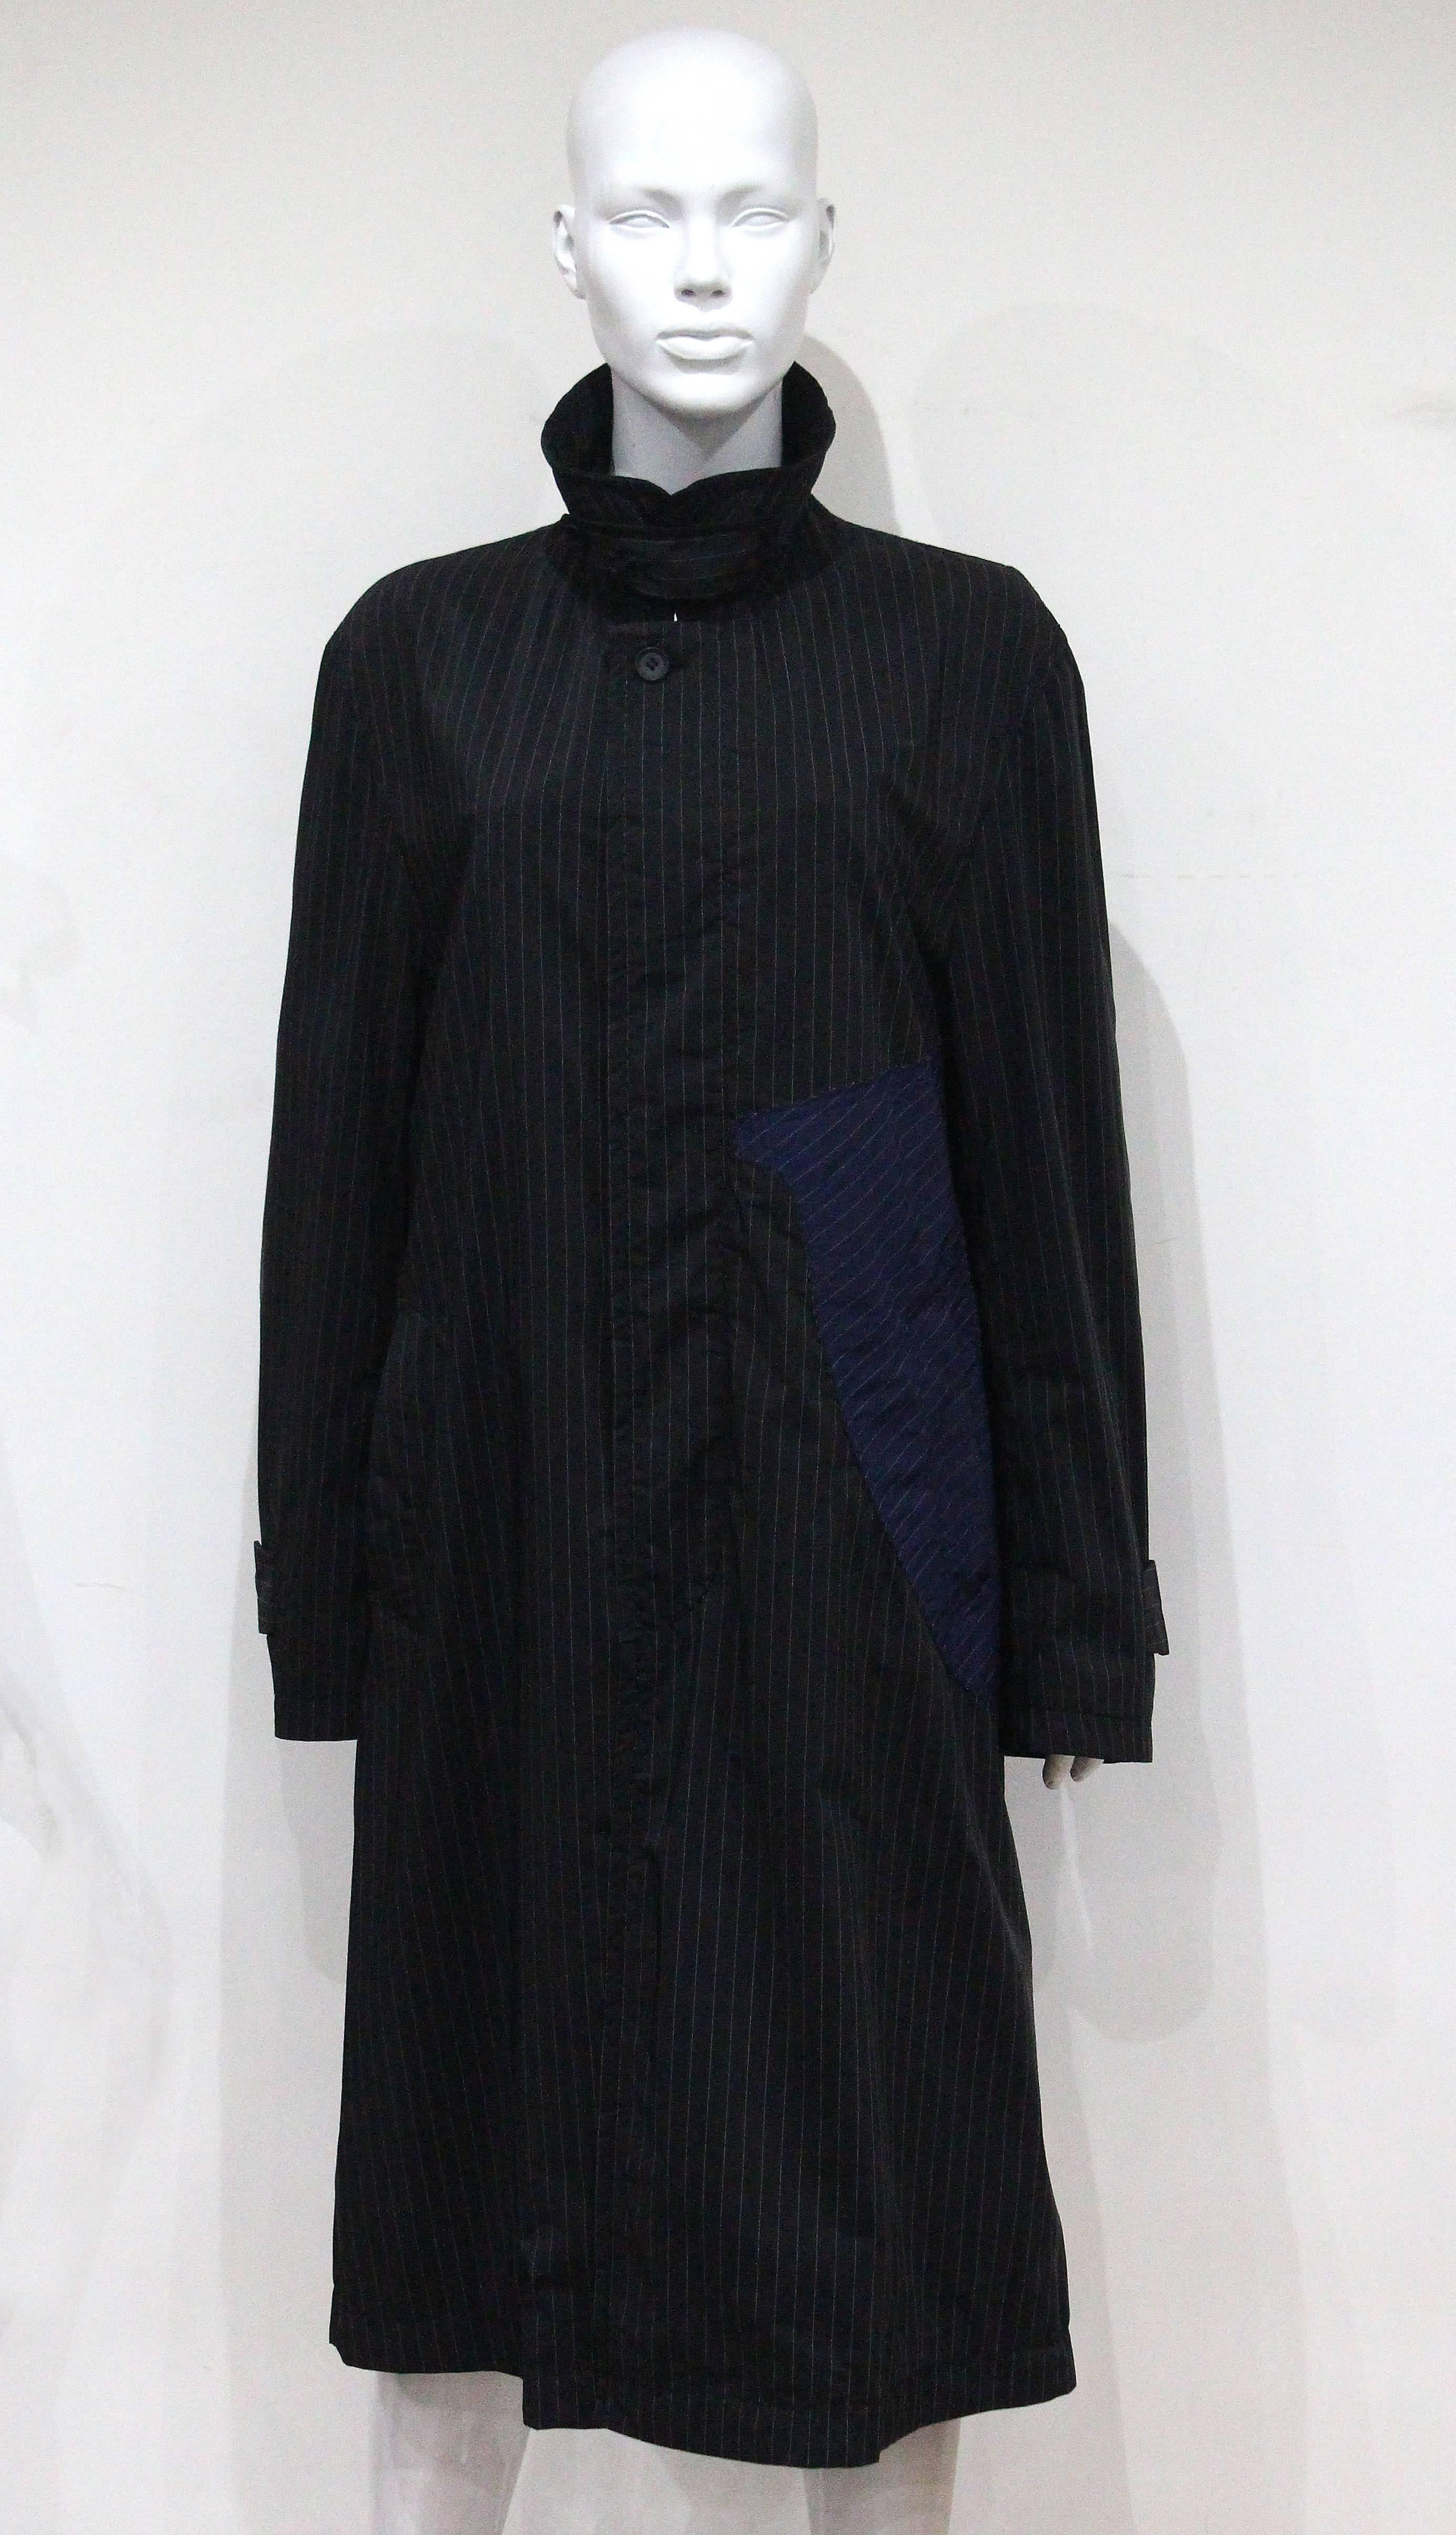 A Issey Miyake windbreaker coat from the 1990s, the coat features a pinstripe design with a black base and cut out panels in navy blue. 

Unisex